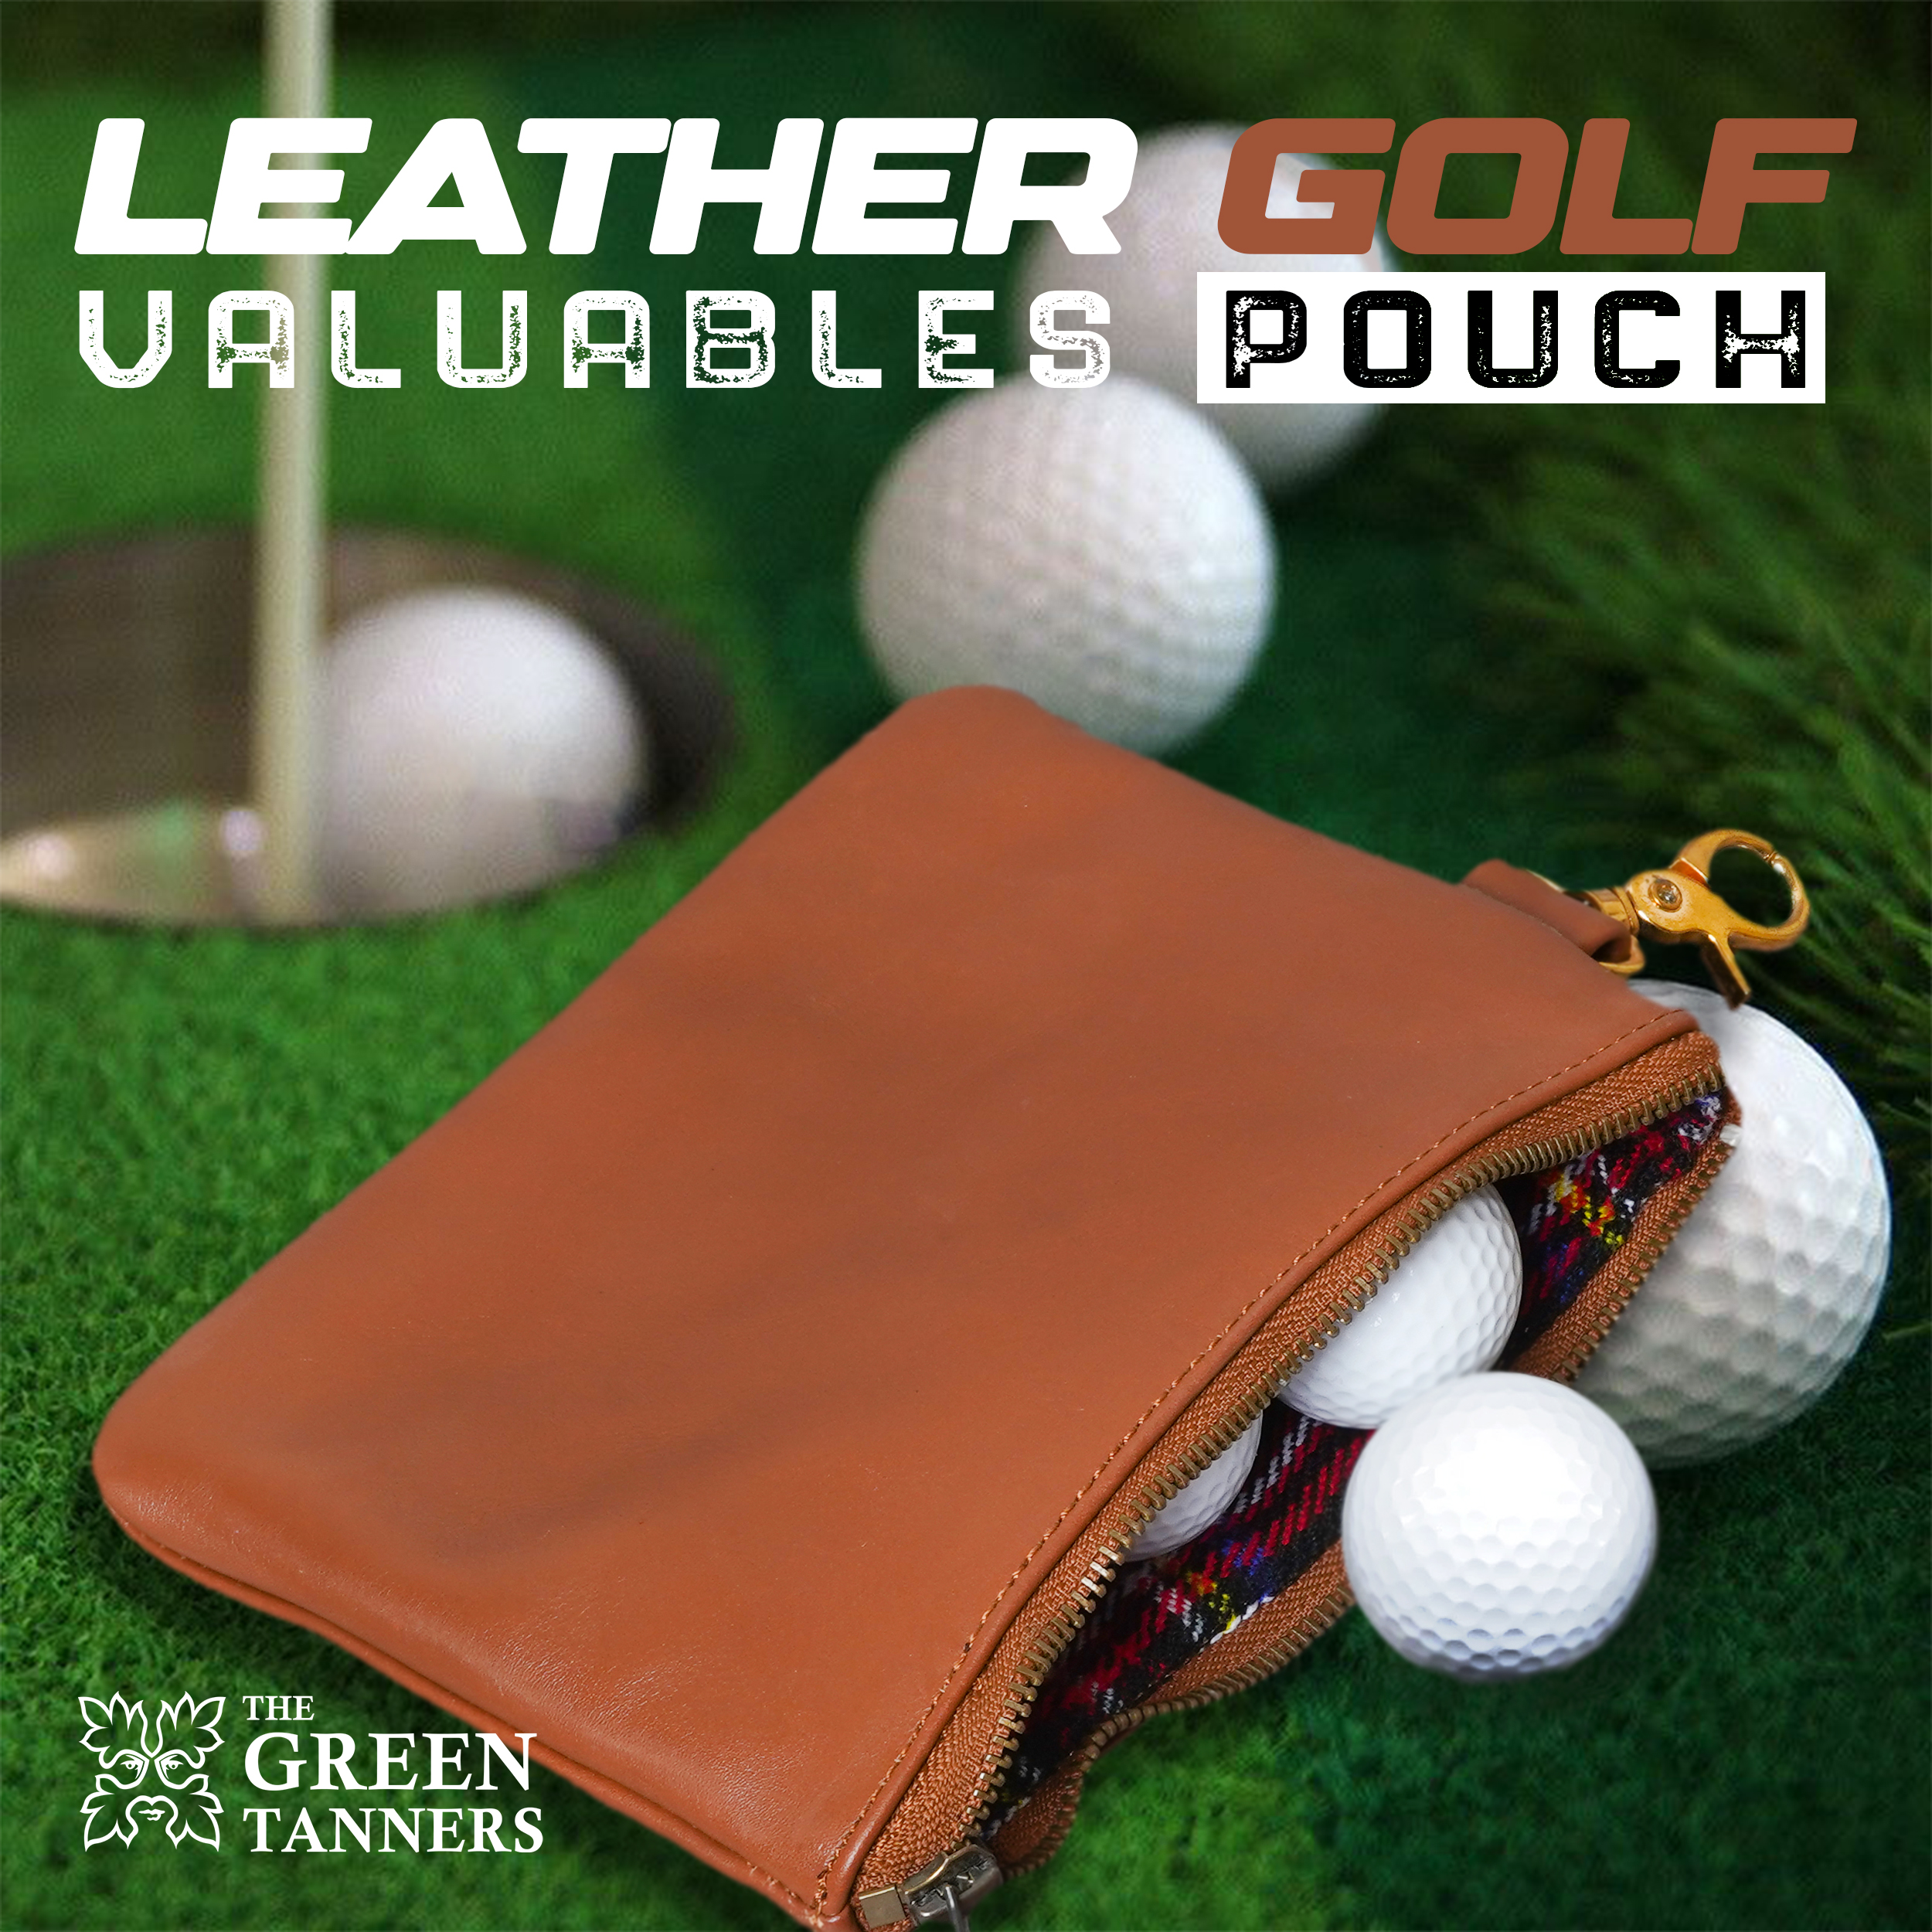 Leather Golf Pouch, Golf Accessories, Leather Golf Ball Bag